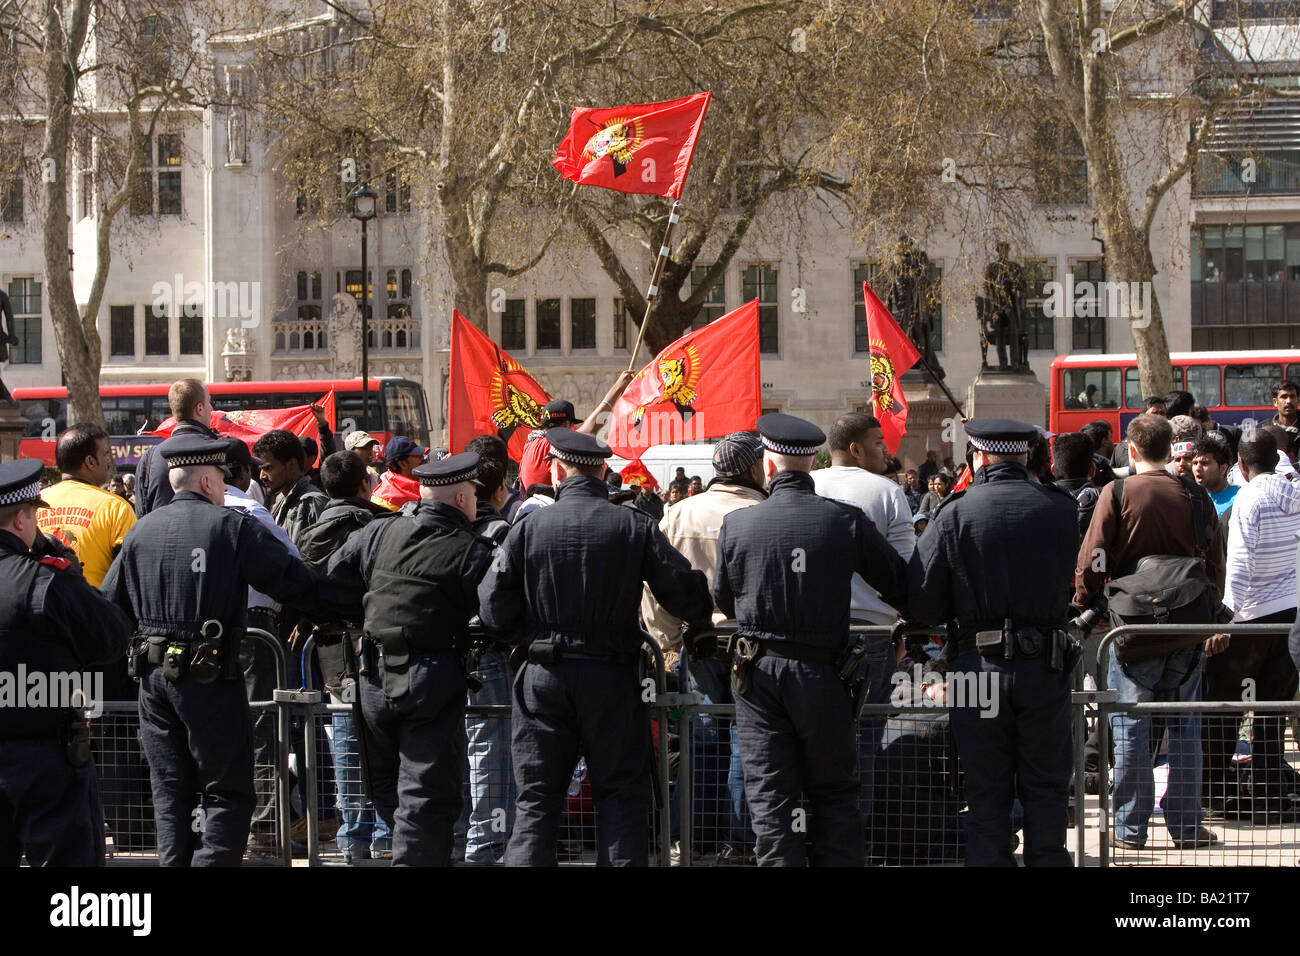 Police stand ready in parliament square as Sri Lankans demonstrate Stock Photo